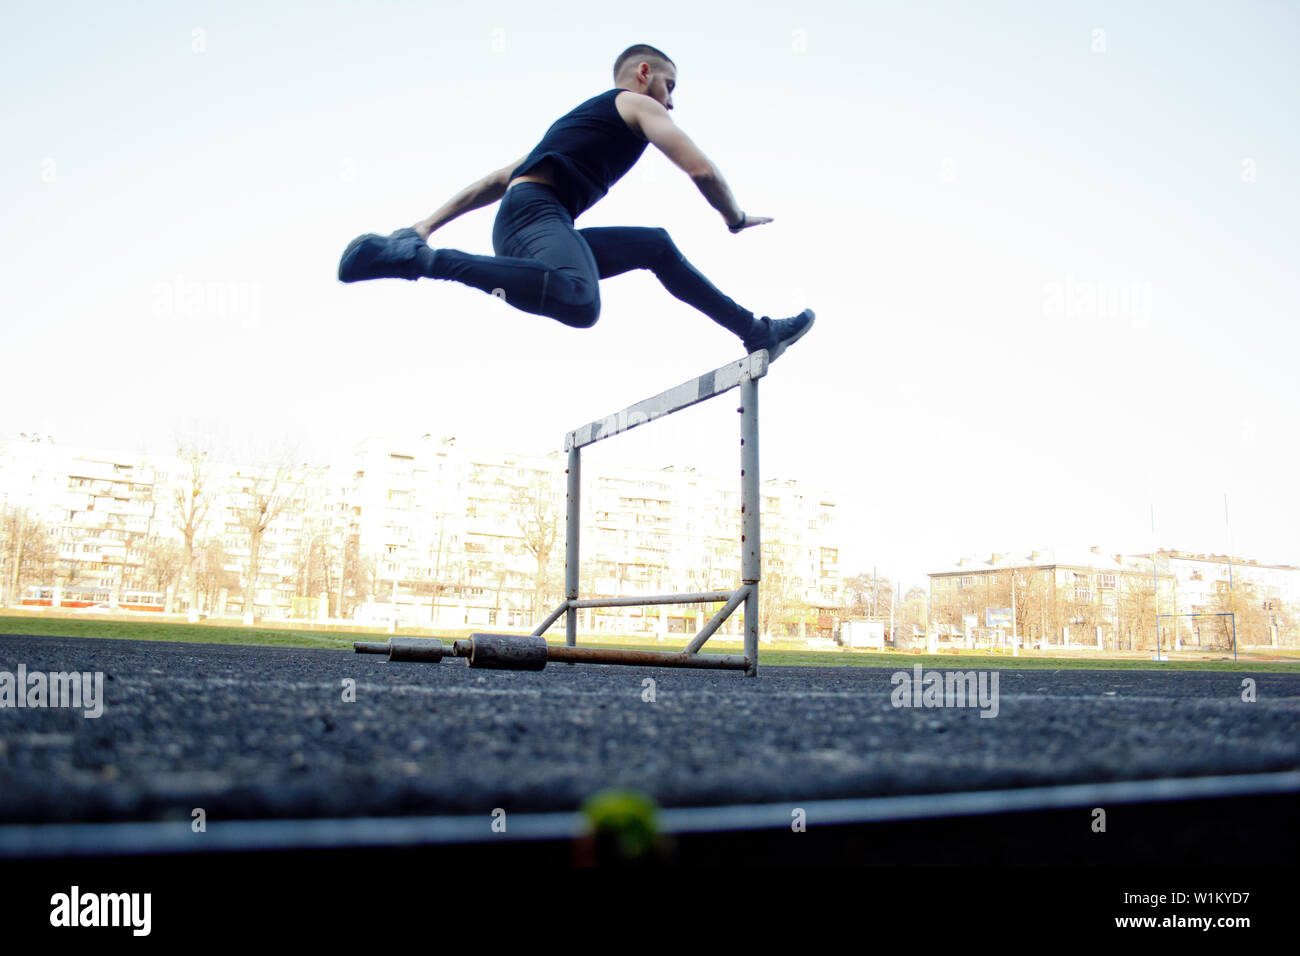 one caucasian male in a jump over a barrier. running on the stadium. Track and field runner in sport uniform in flight. energetic physical activities. Stock Photo